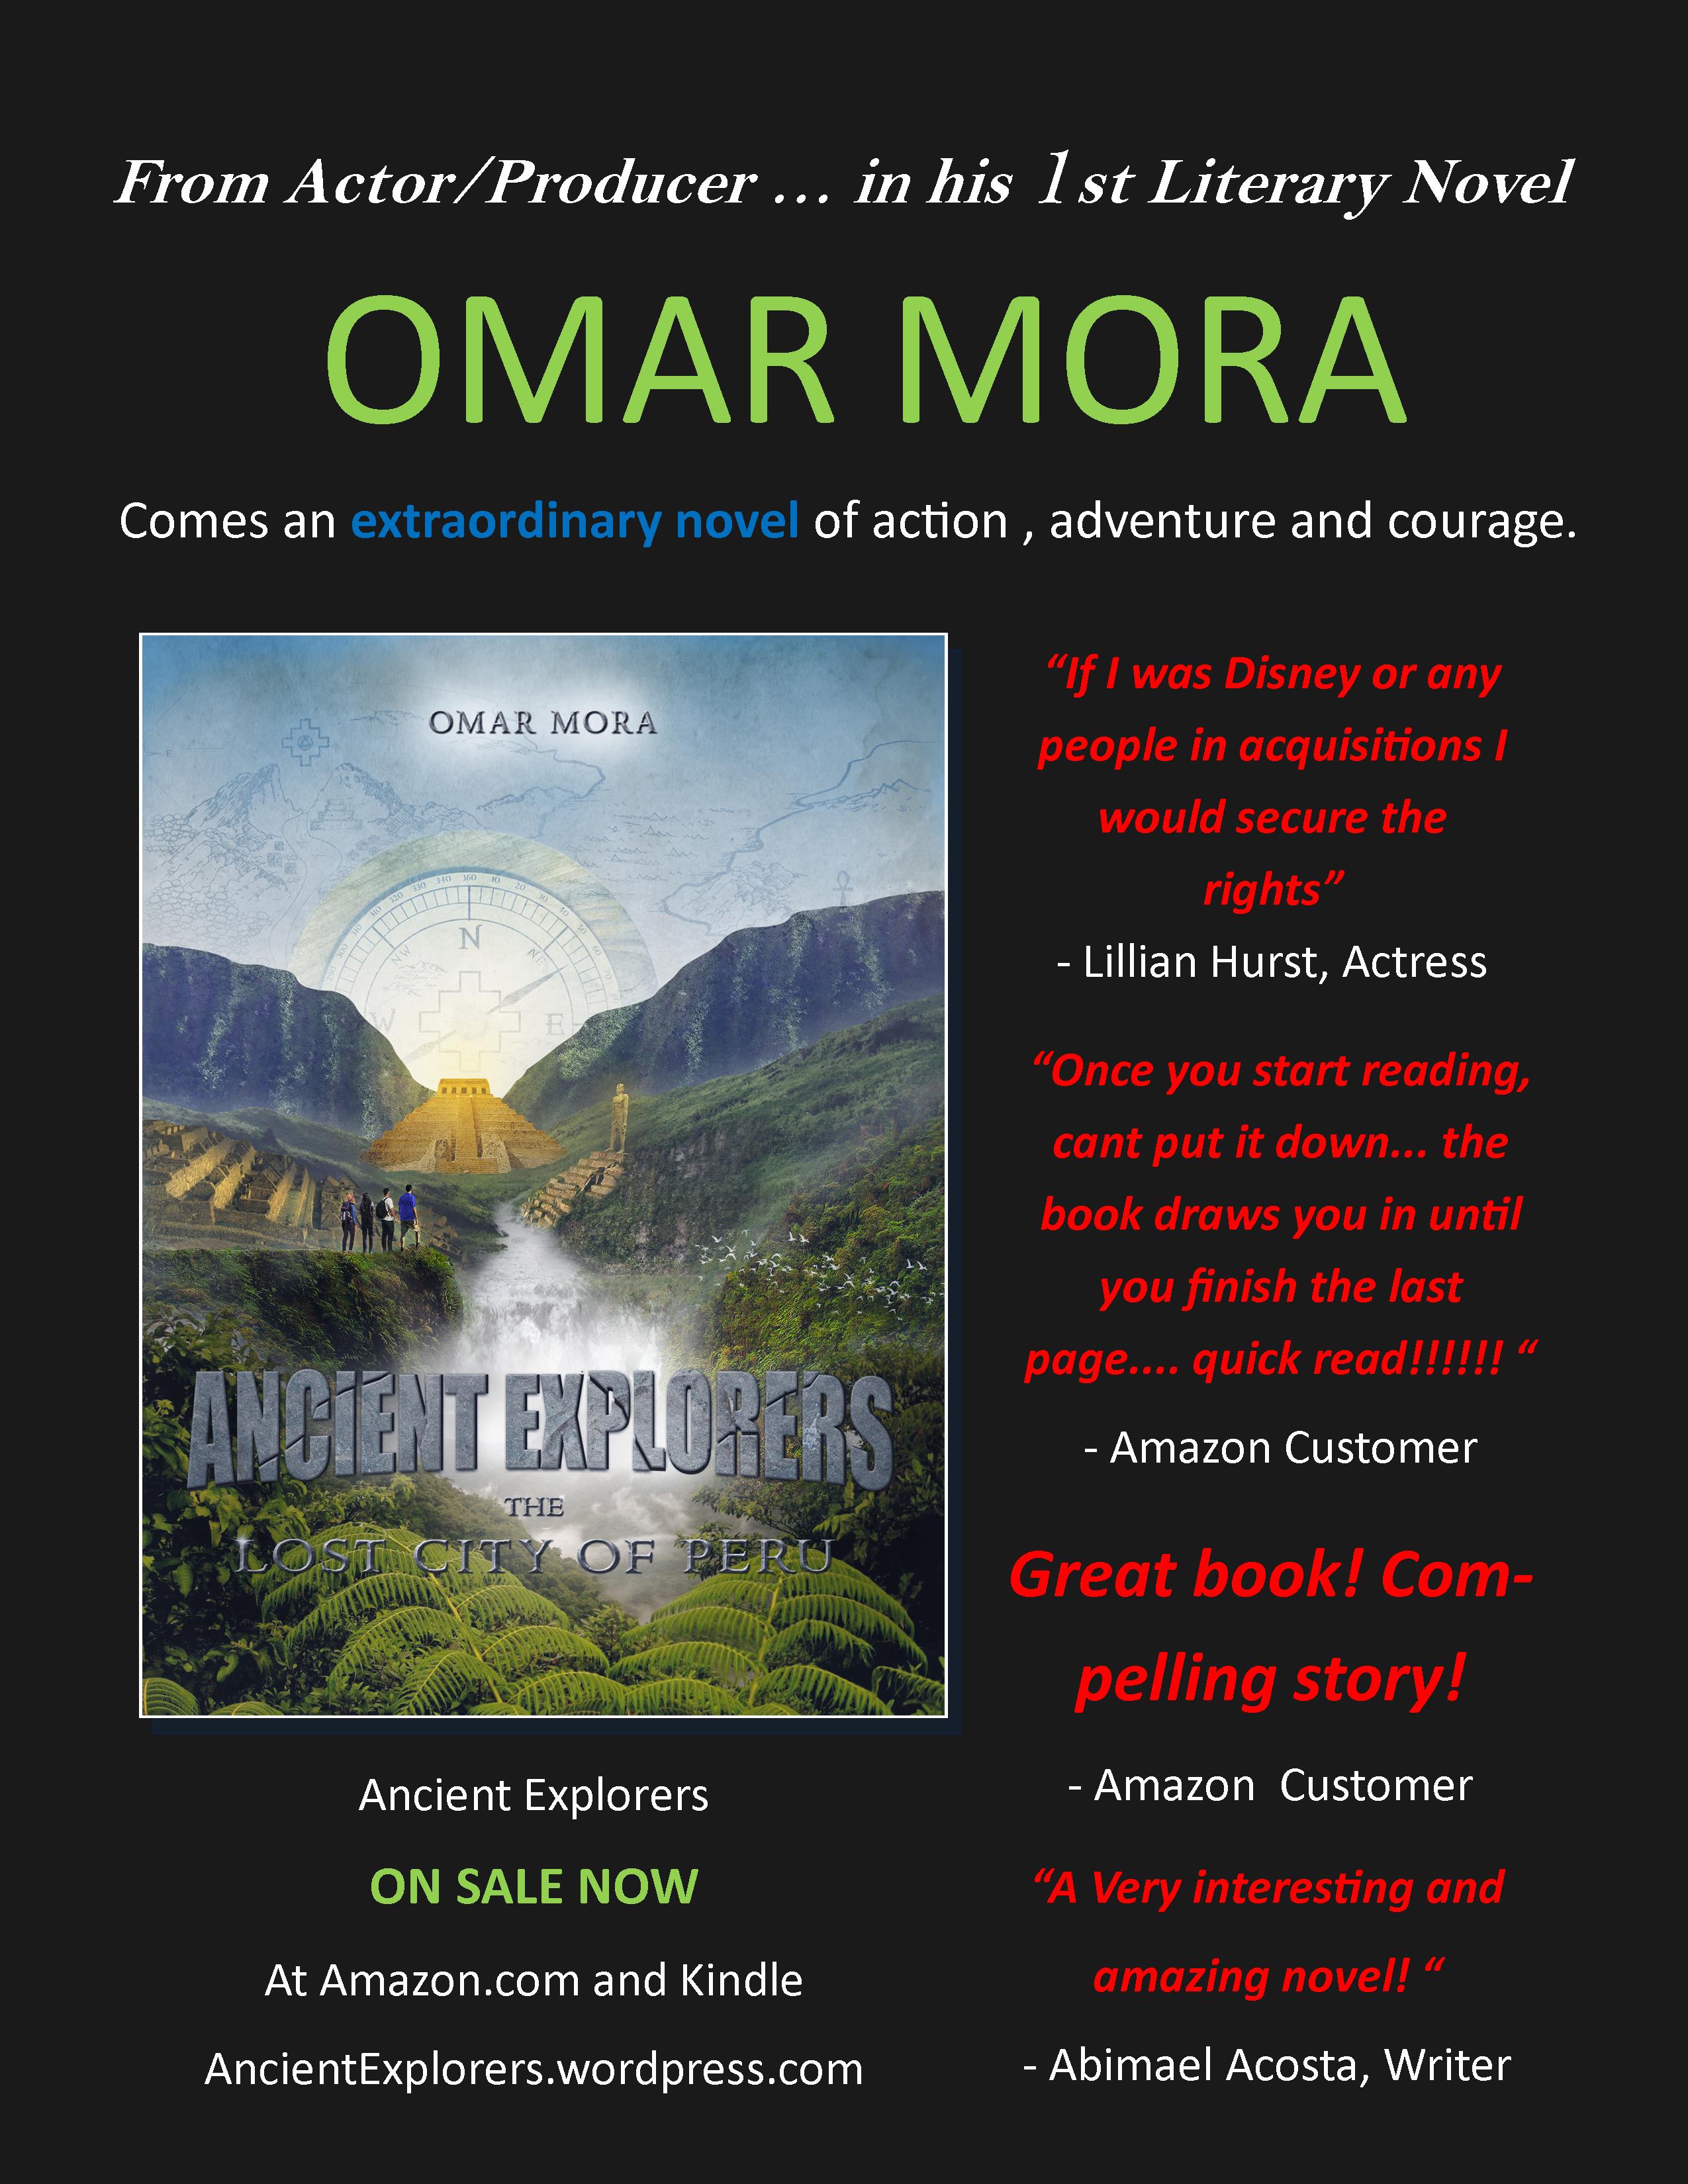 Reviews for Omar's first literary novel Ancient Explorers: The Lost City of Peru.